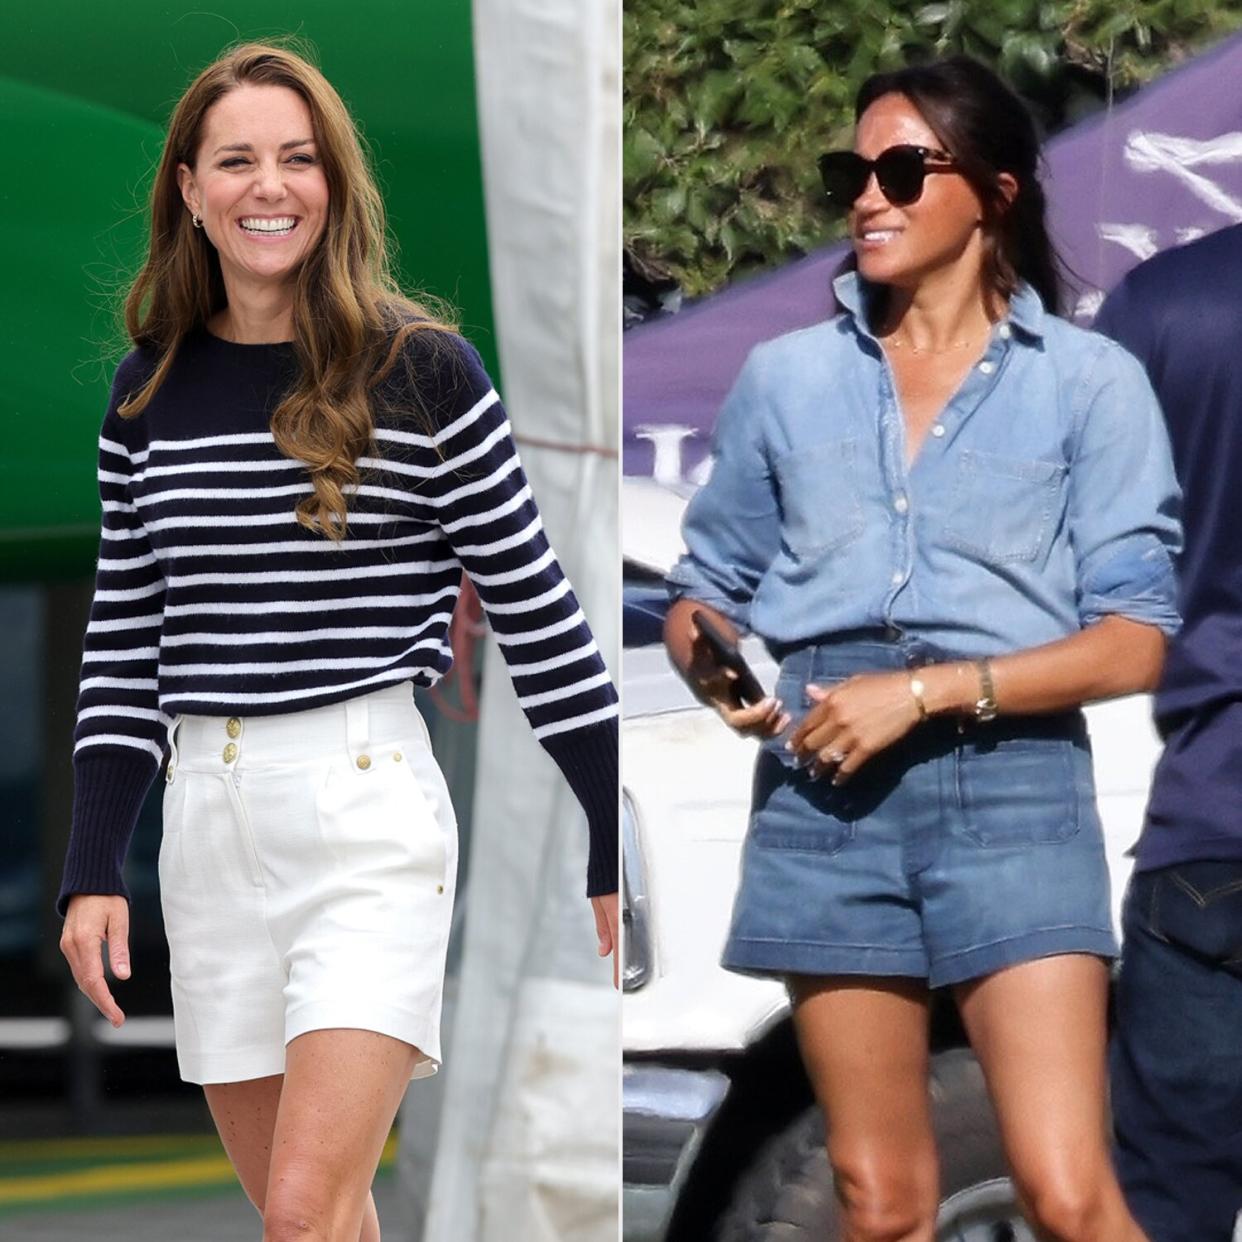 Catherine, Duchess Of Cambridge is seen during her visit to the 1851 Trust and the Great Britain SailGP Team; Meghan Markle hangs out with the Polo WAGS as she enjoys a cold drink and watches Prince Harry play Polo